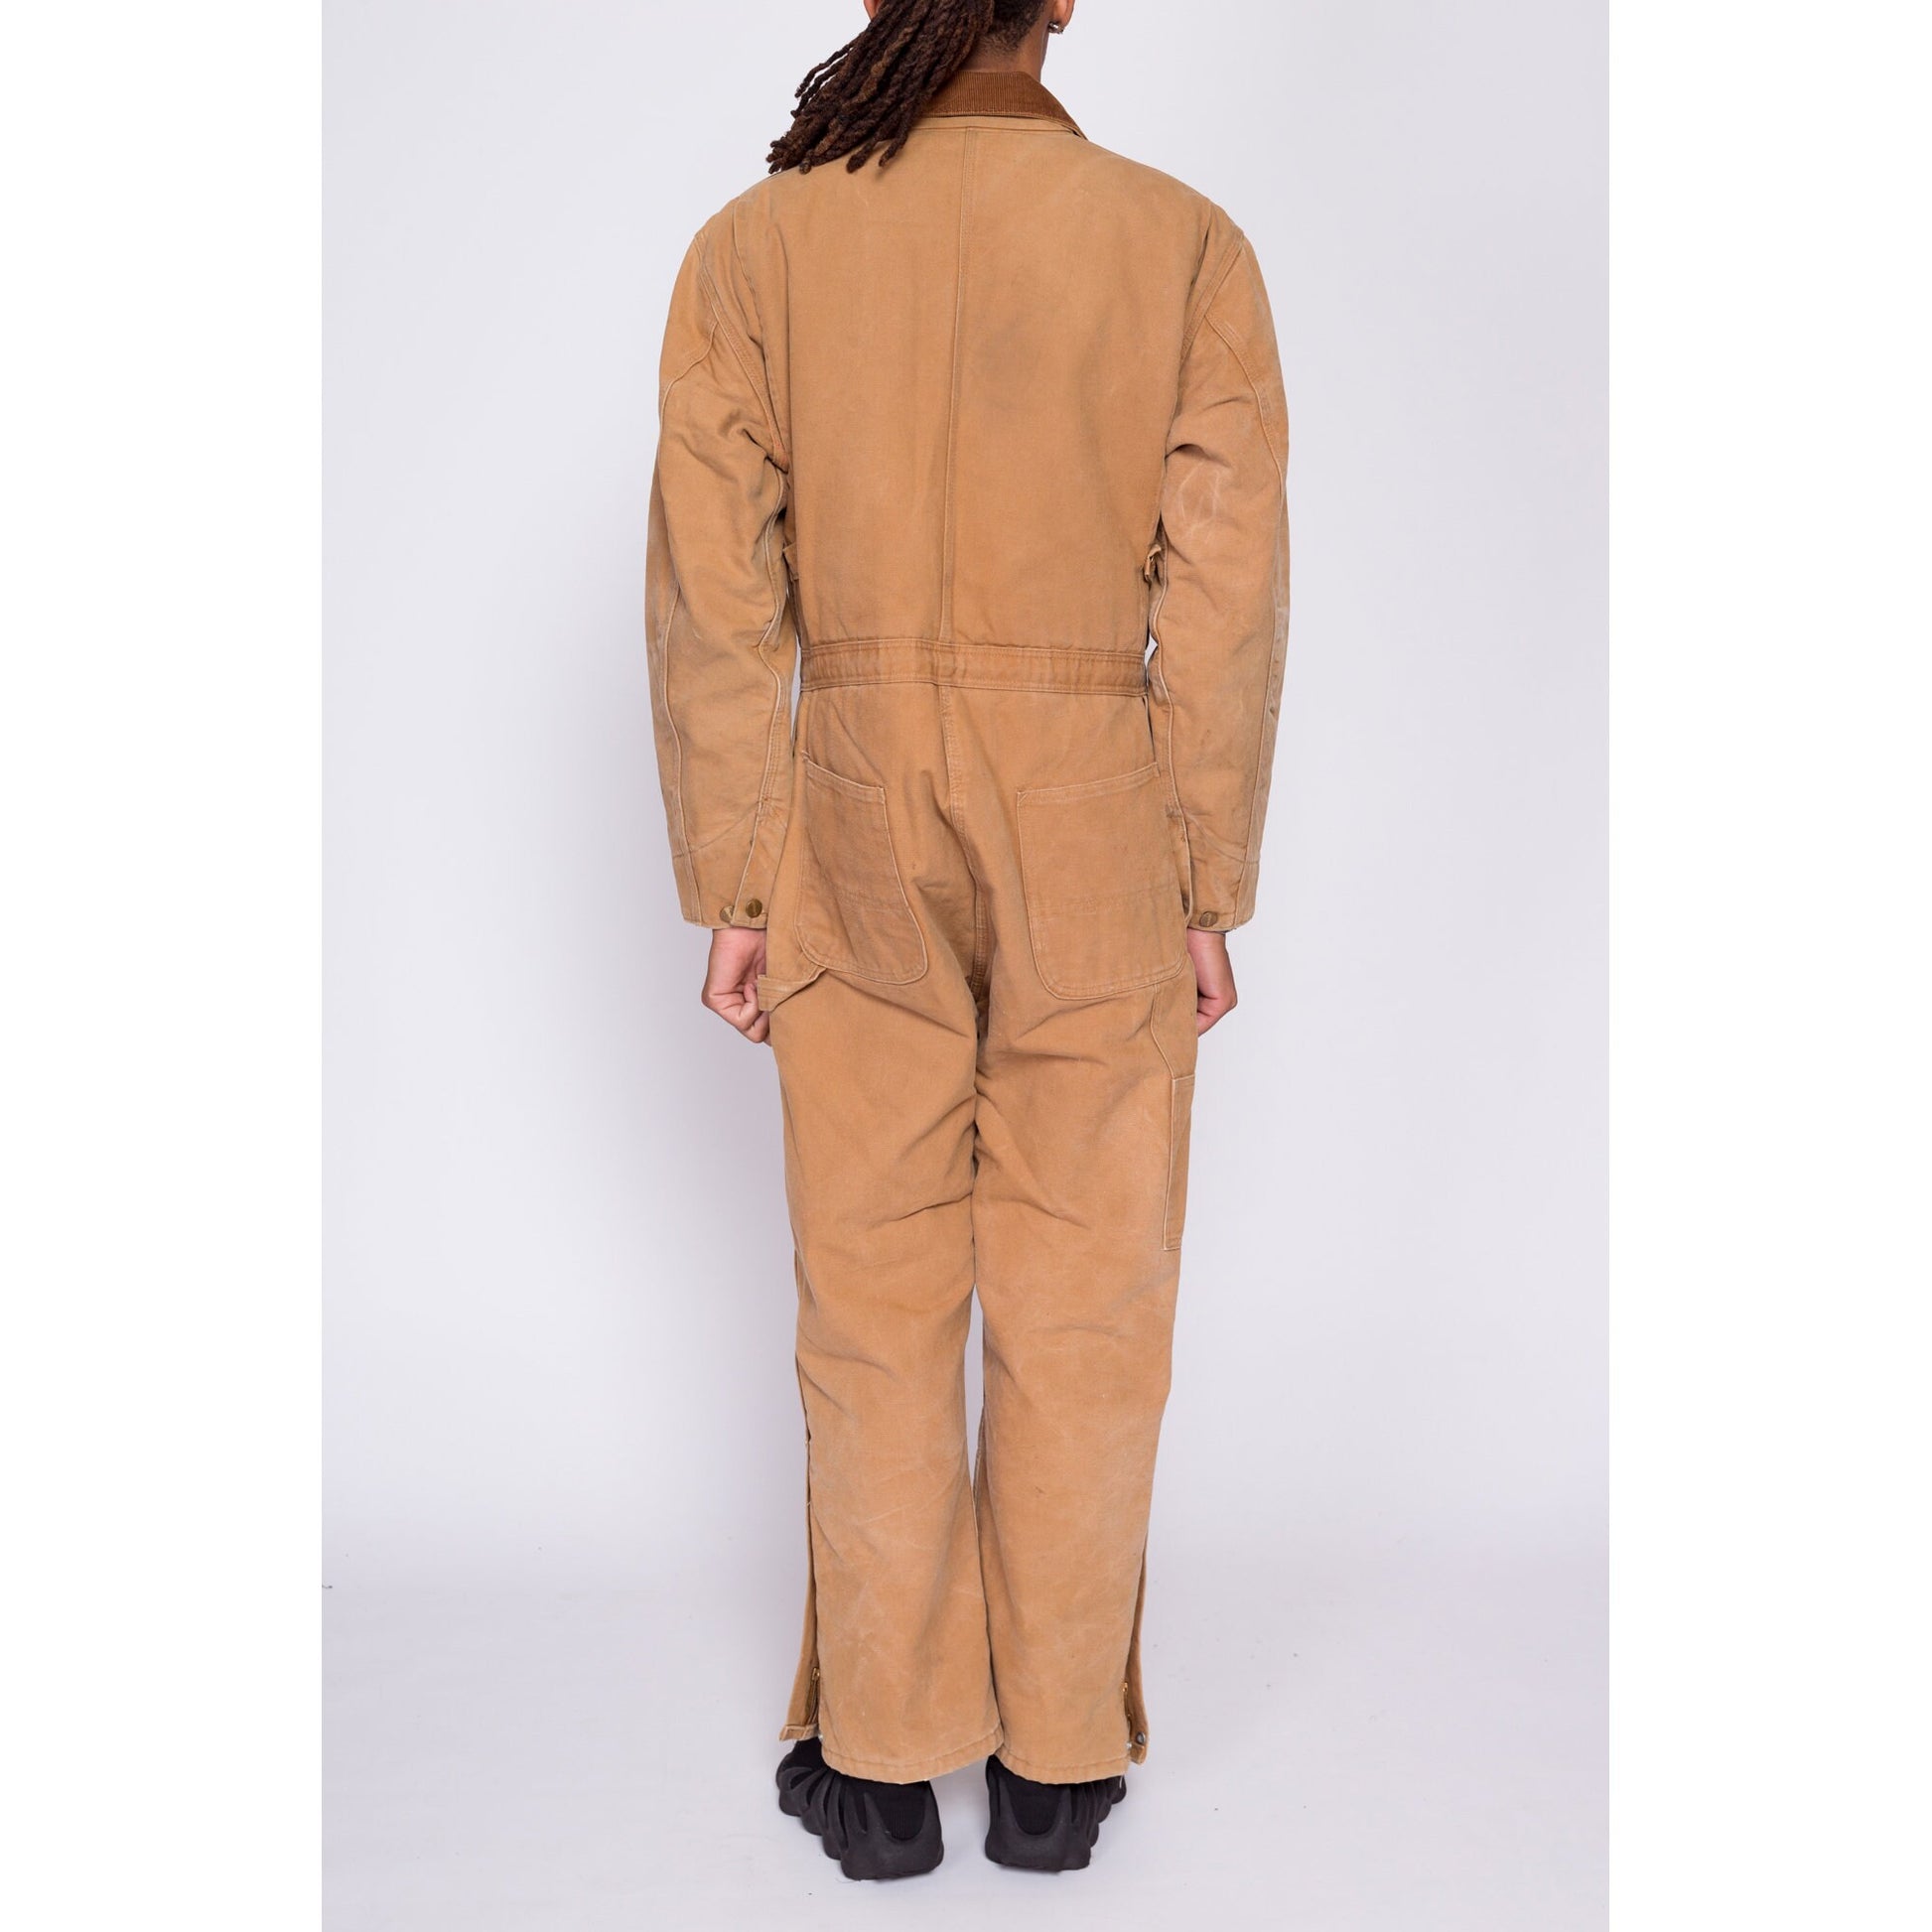 90s Carhartt Made in USA Insulated Coveralls - 42 Short